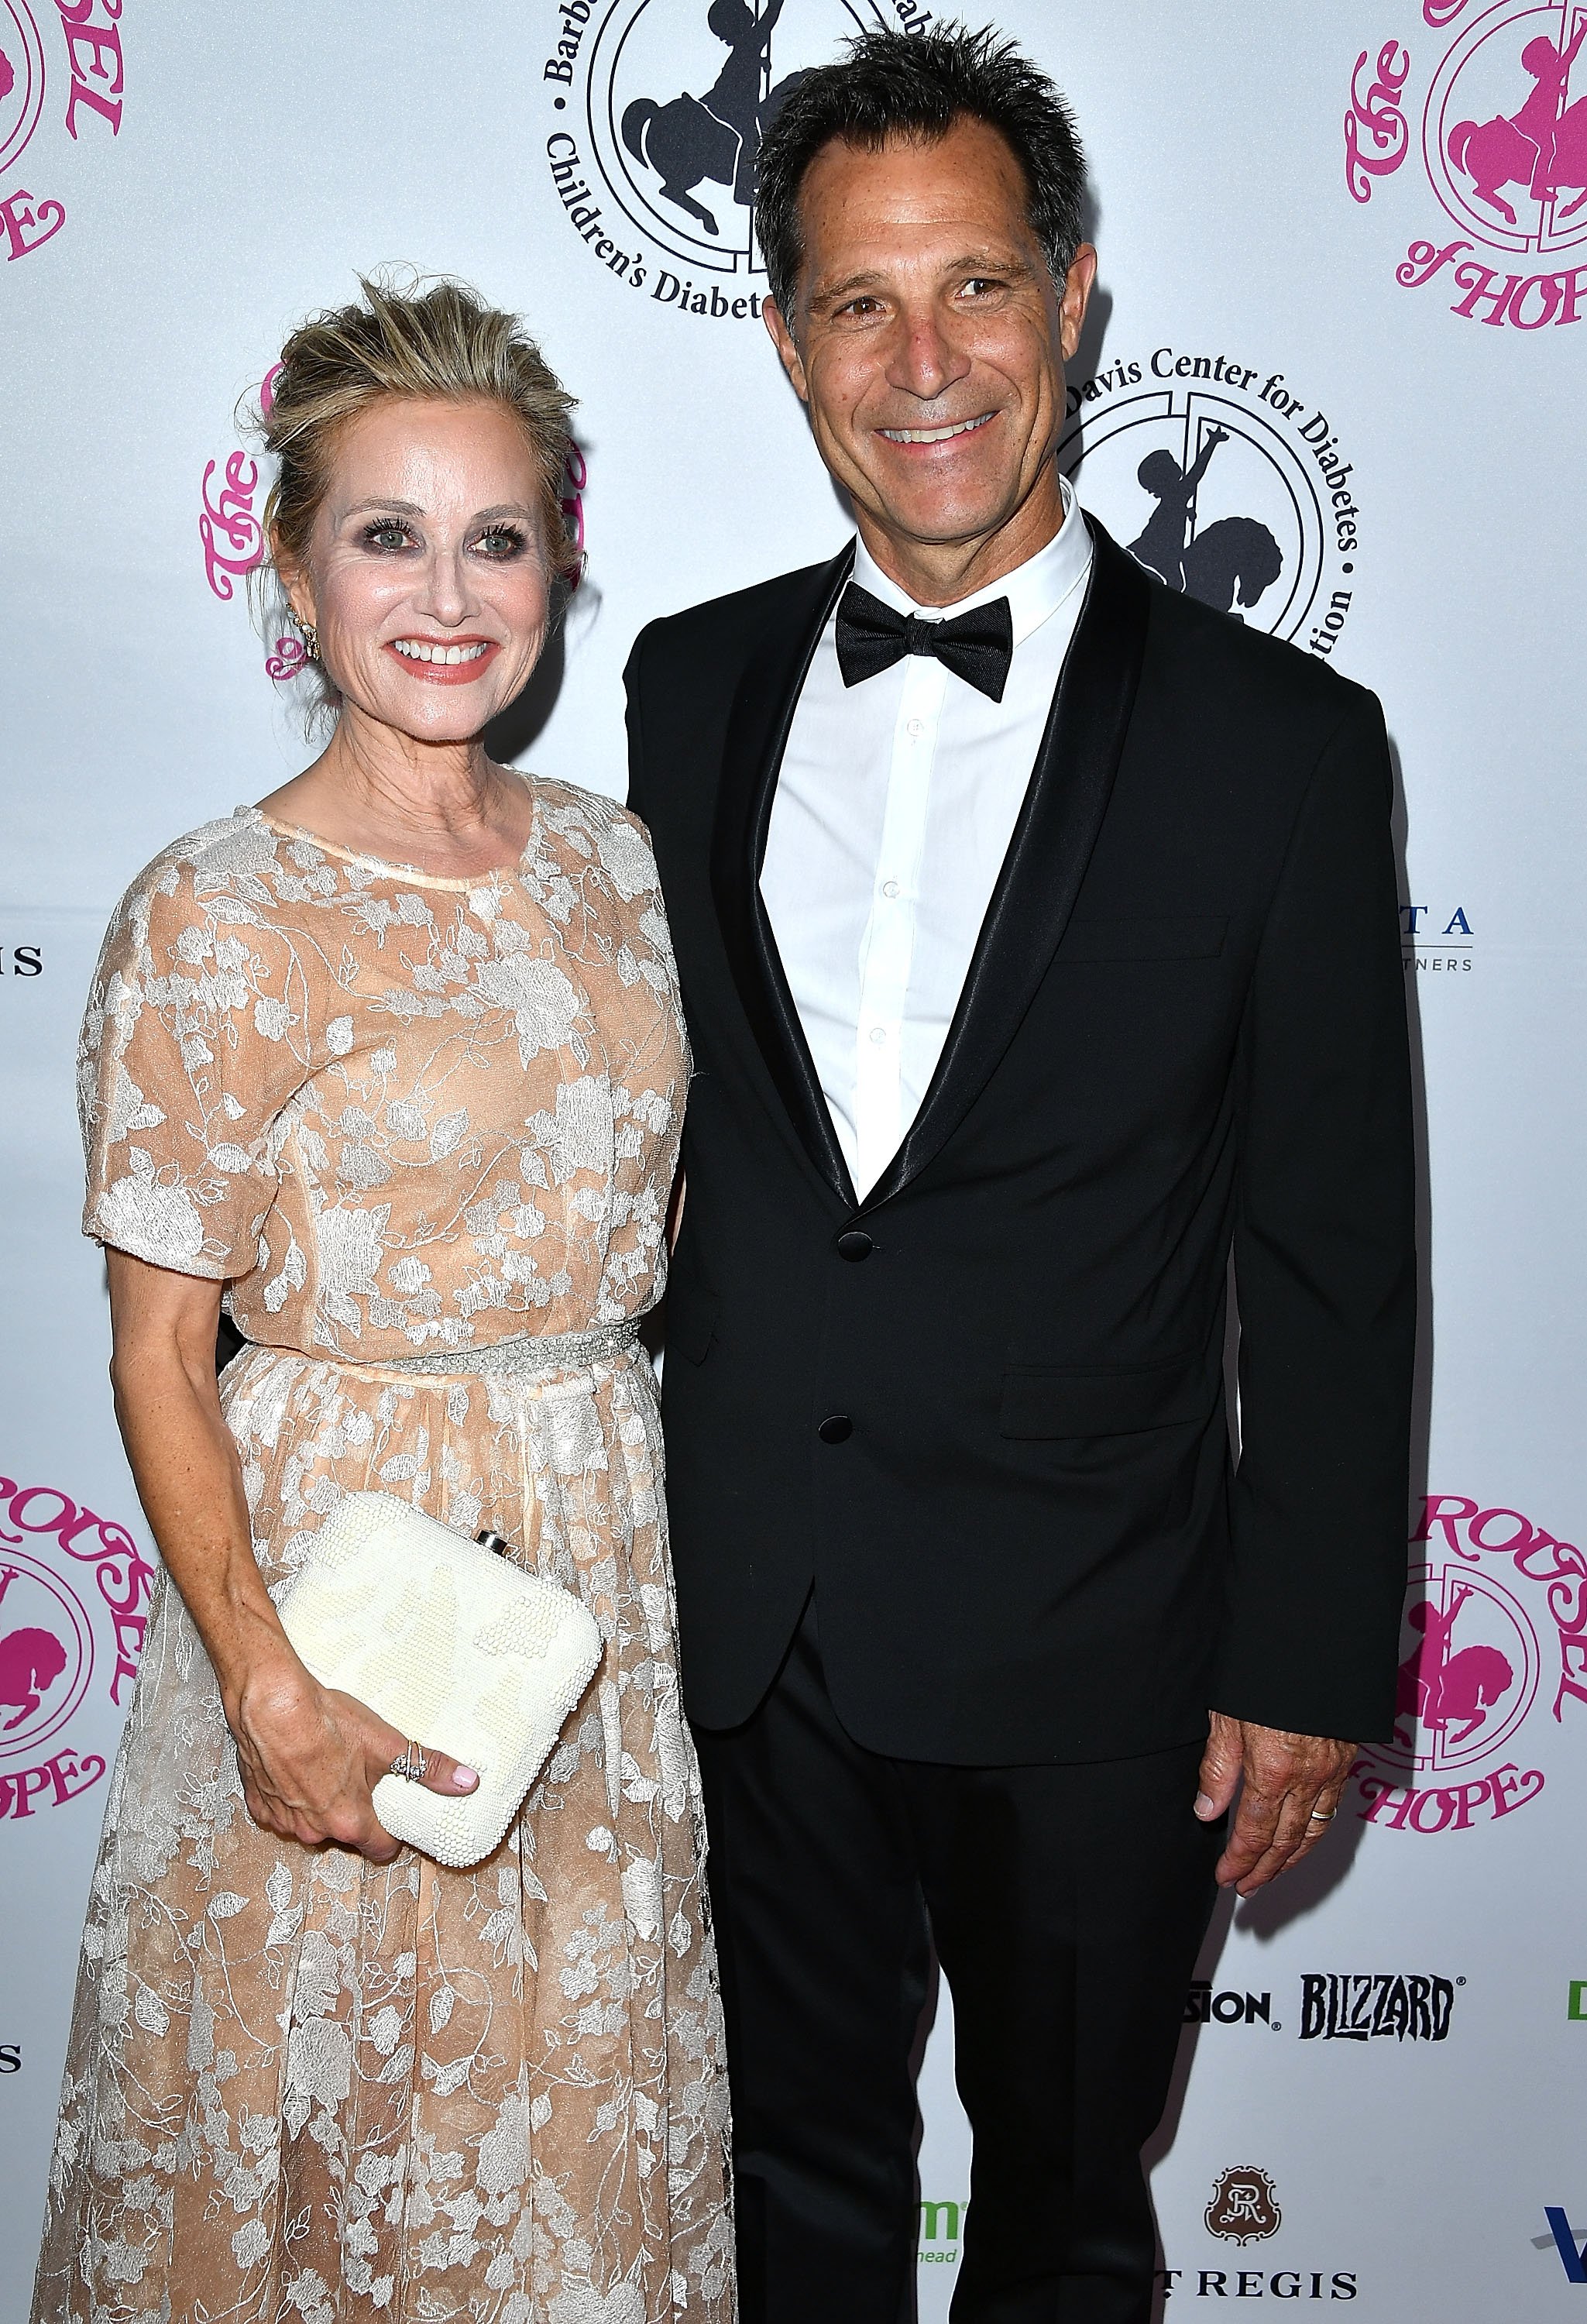 Maureen McCormick, Michael Cummings arrives at the 2016 Carousel Of Hope Ball at The Beverly Hilton Hotel on October 8, 2016 in Beverly Hills, California. | Source: Getty Images